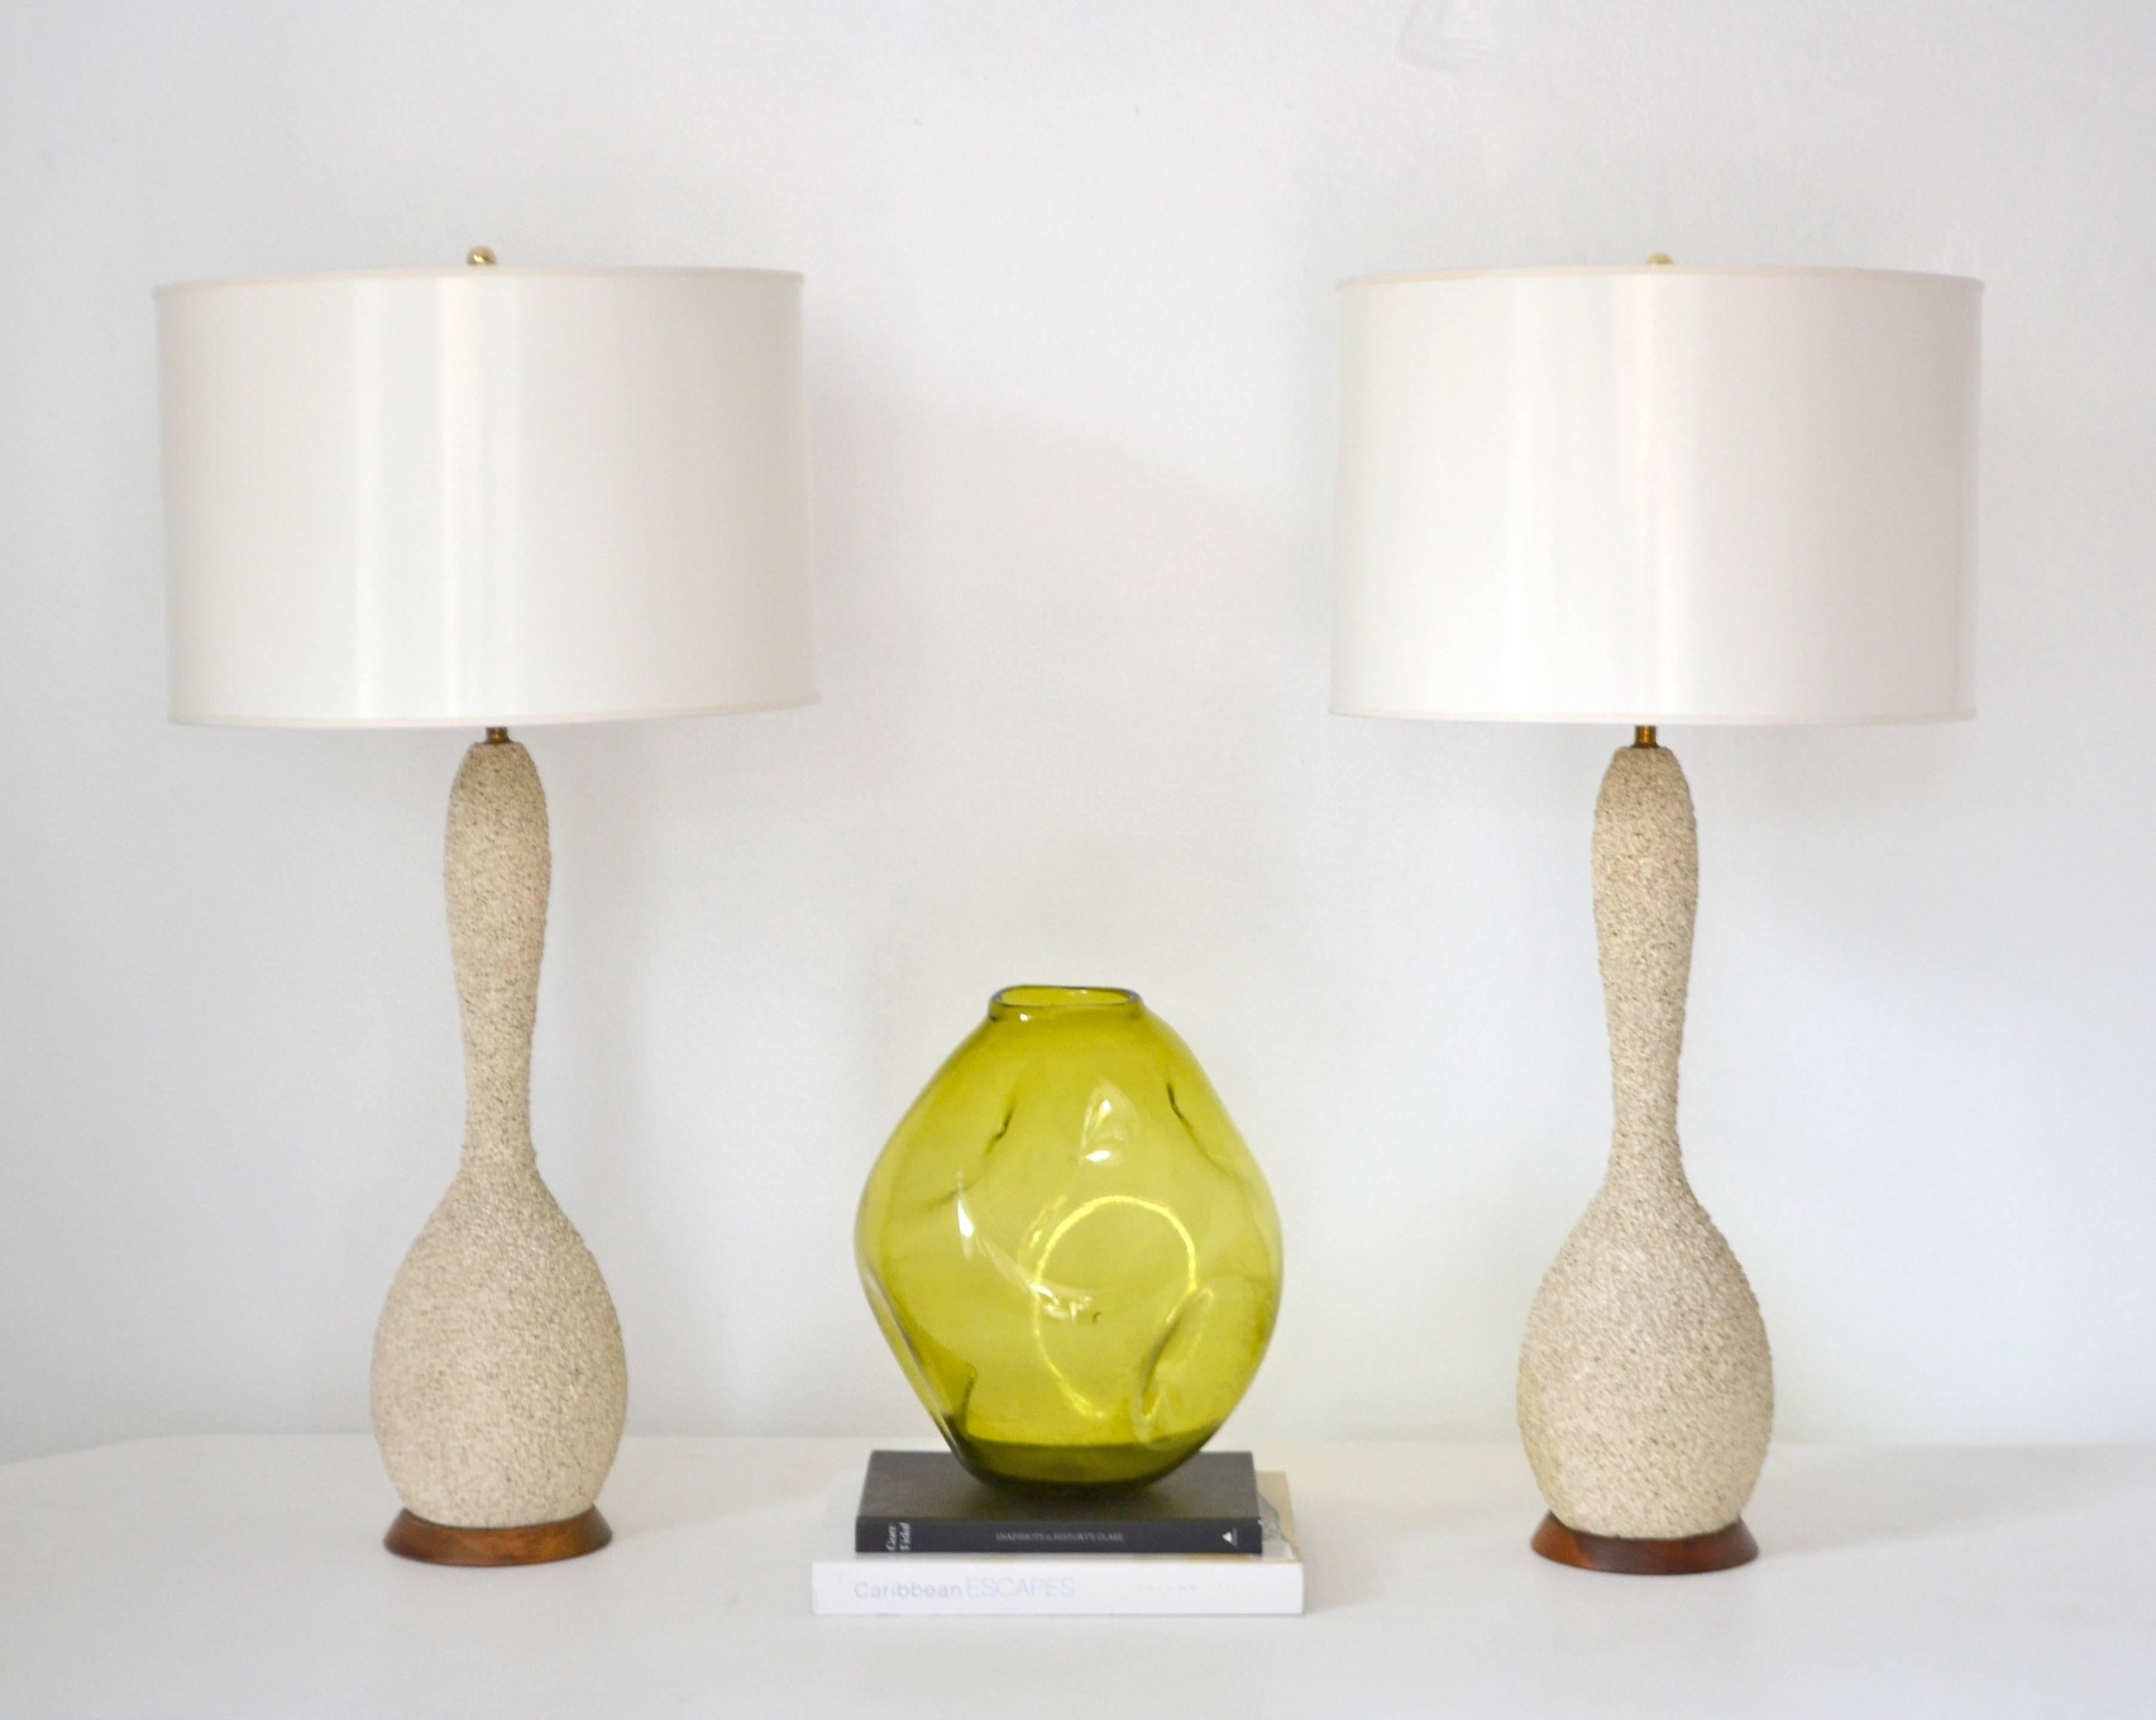 Stunning pair of Mid-Century sand glazed textured ceramic table lamps, circa 1950s-1960s. These artisan crafted hand thrown gourd form table lamps are mounted on turned wood bases and wired with brass fittings. Shades not included. 
Measurements: